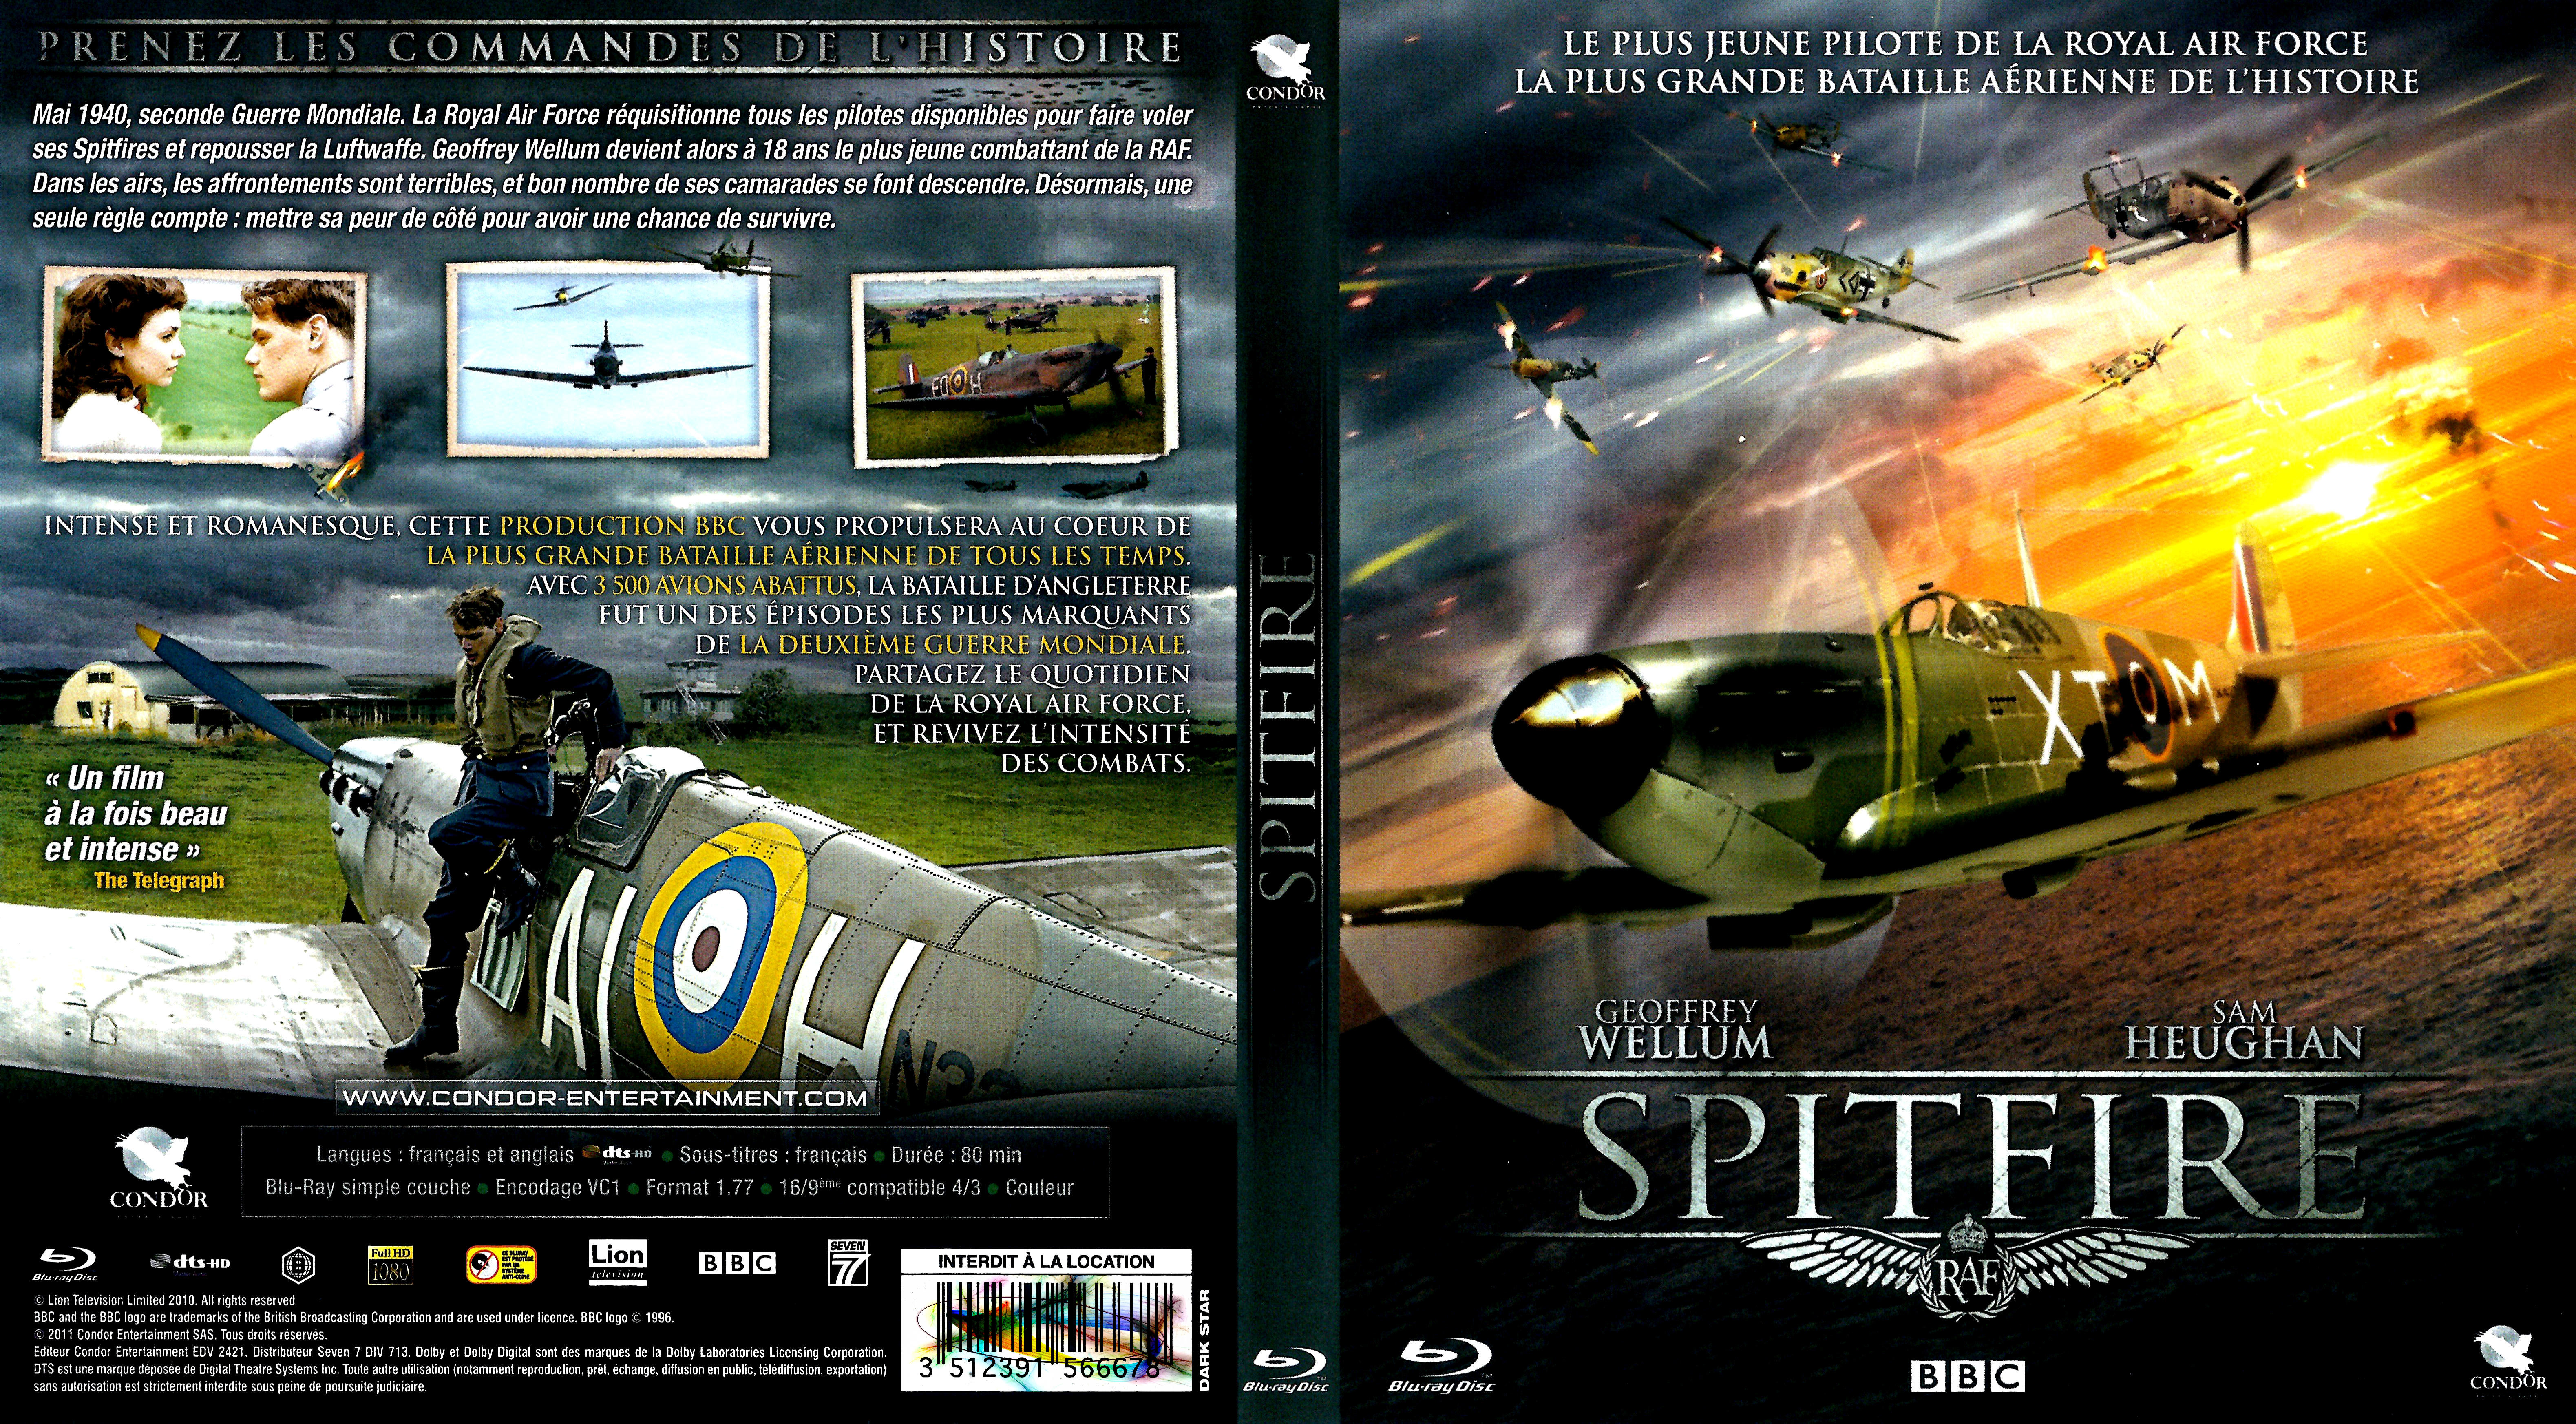 Jaquette DVD Spitfire (BLU-RAY)